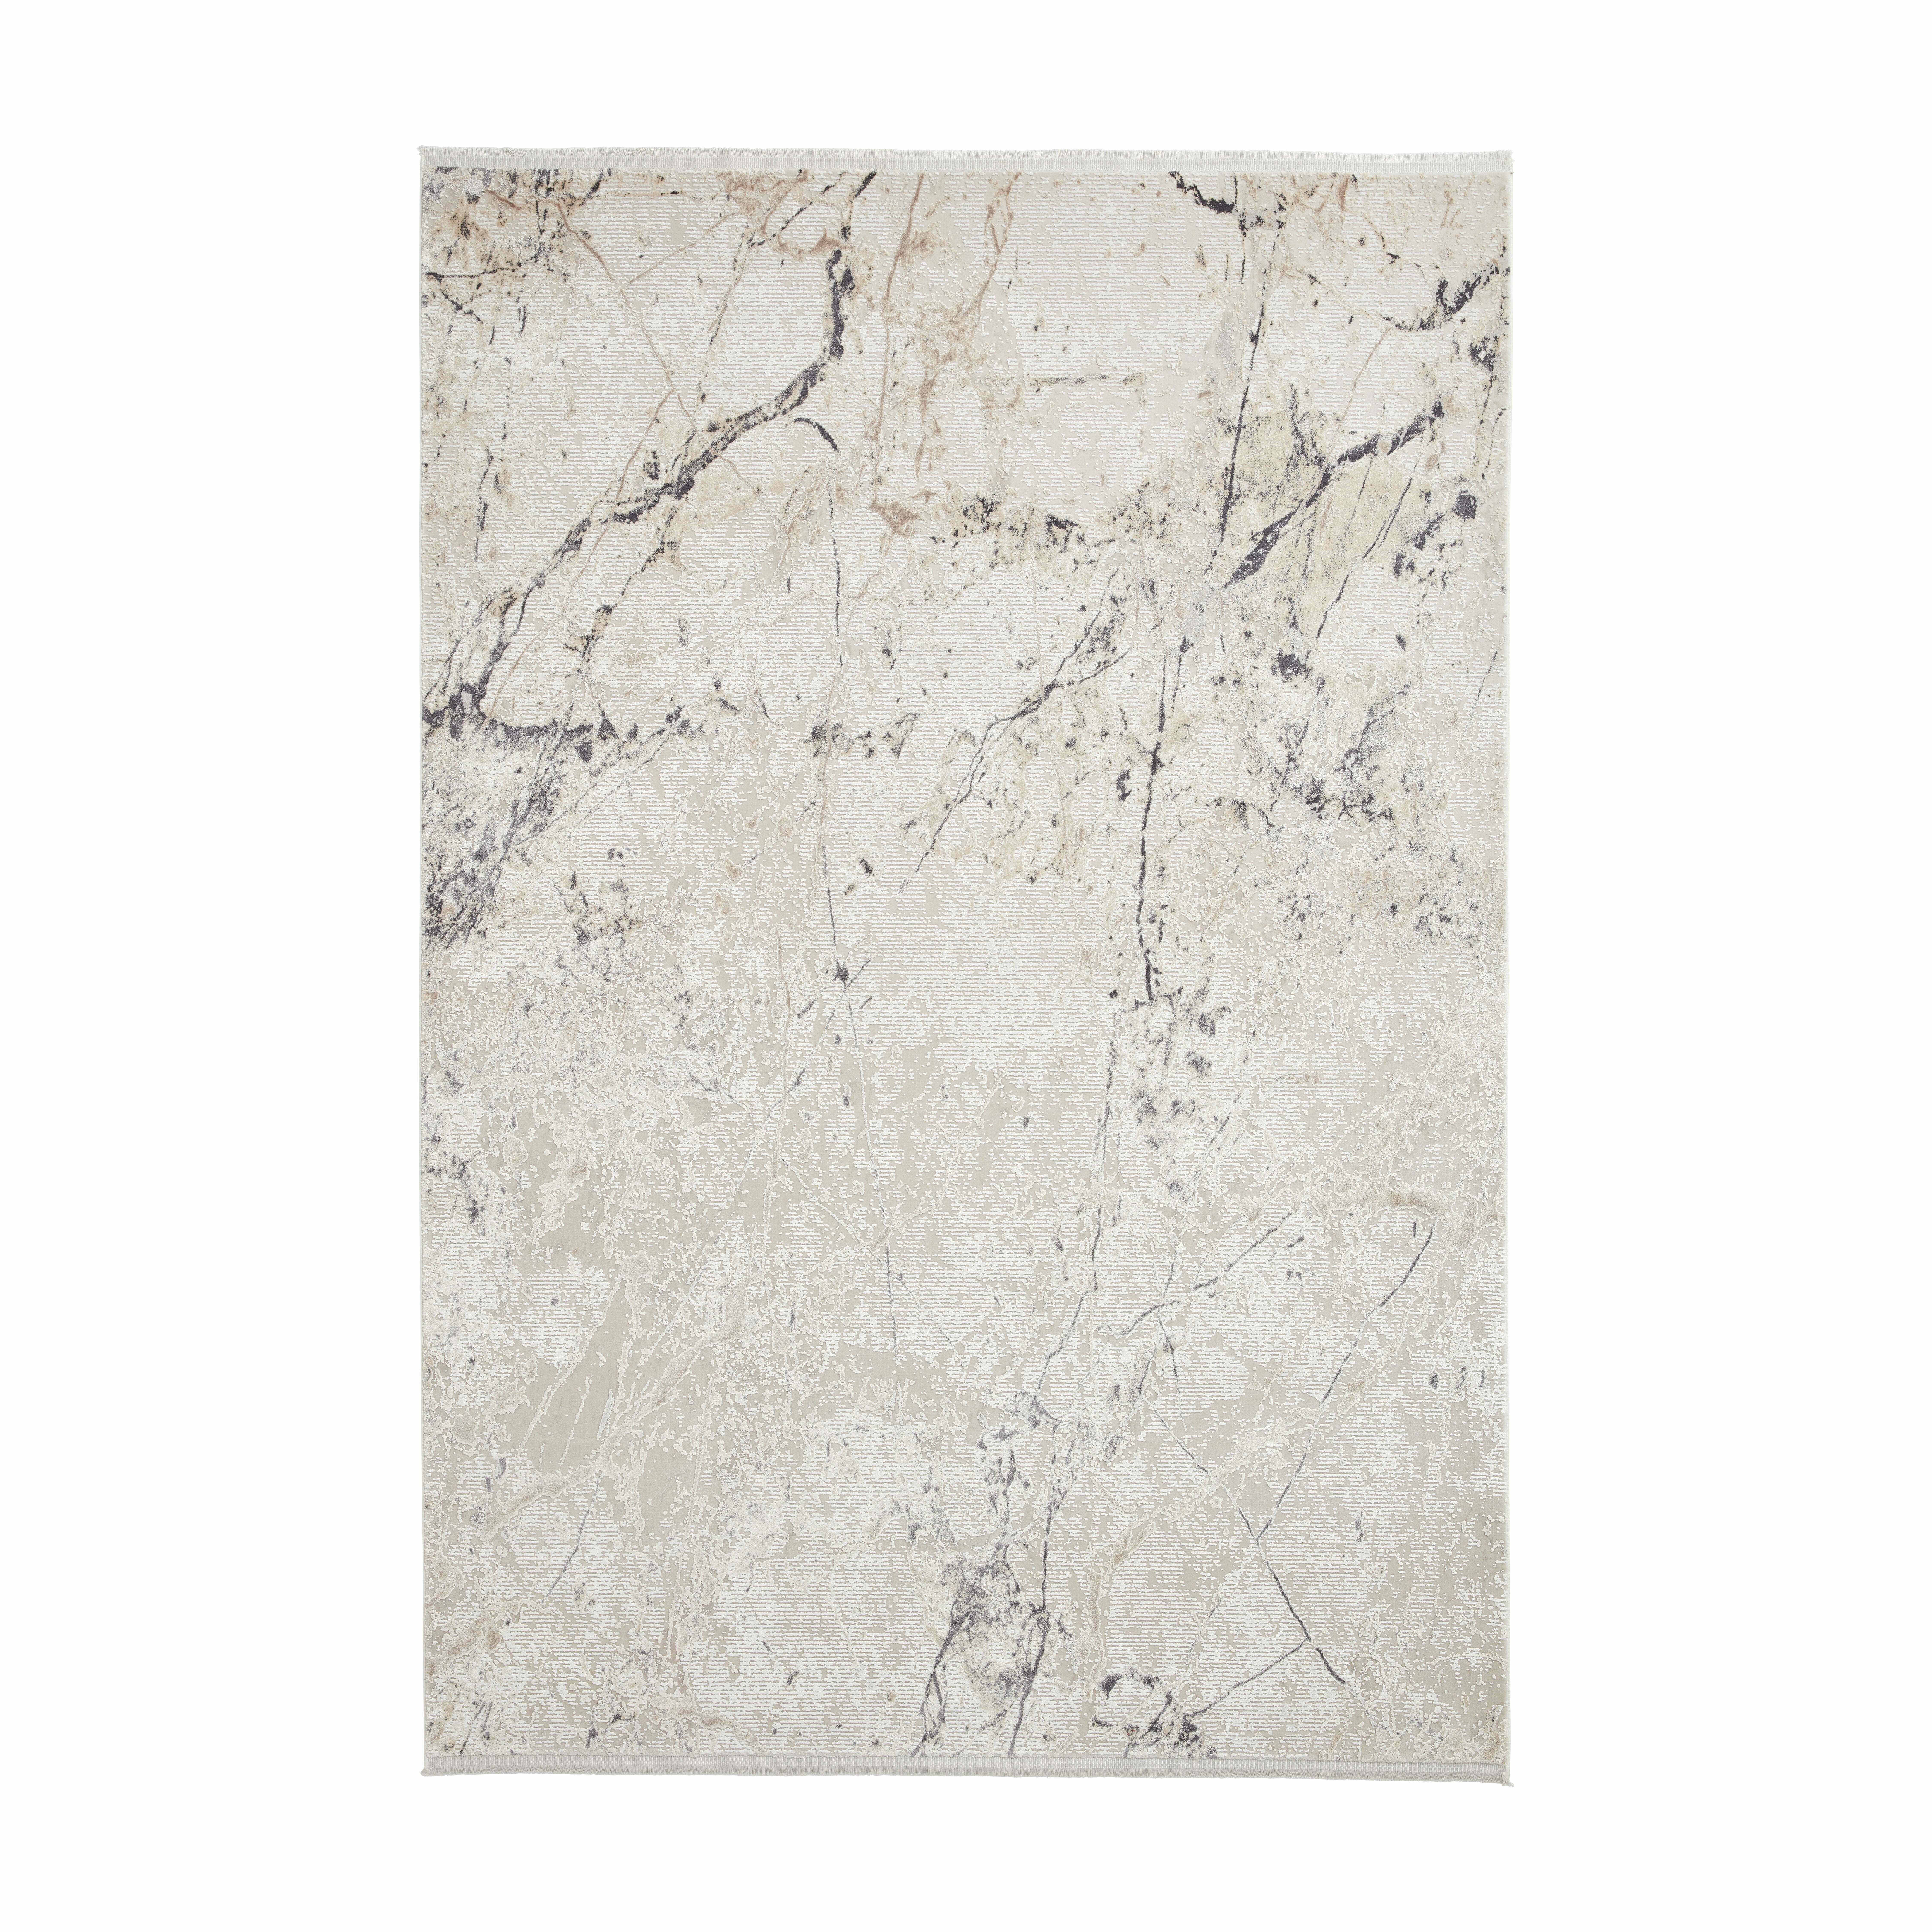 bellagio abstract rug in beige (9141) 3 sizes available